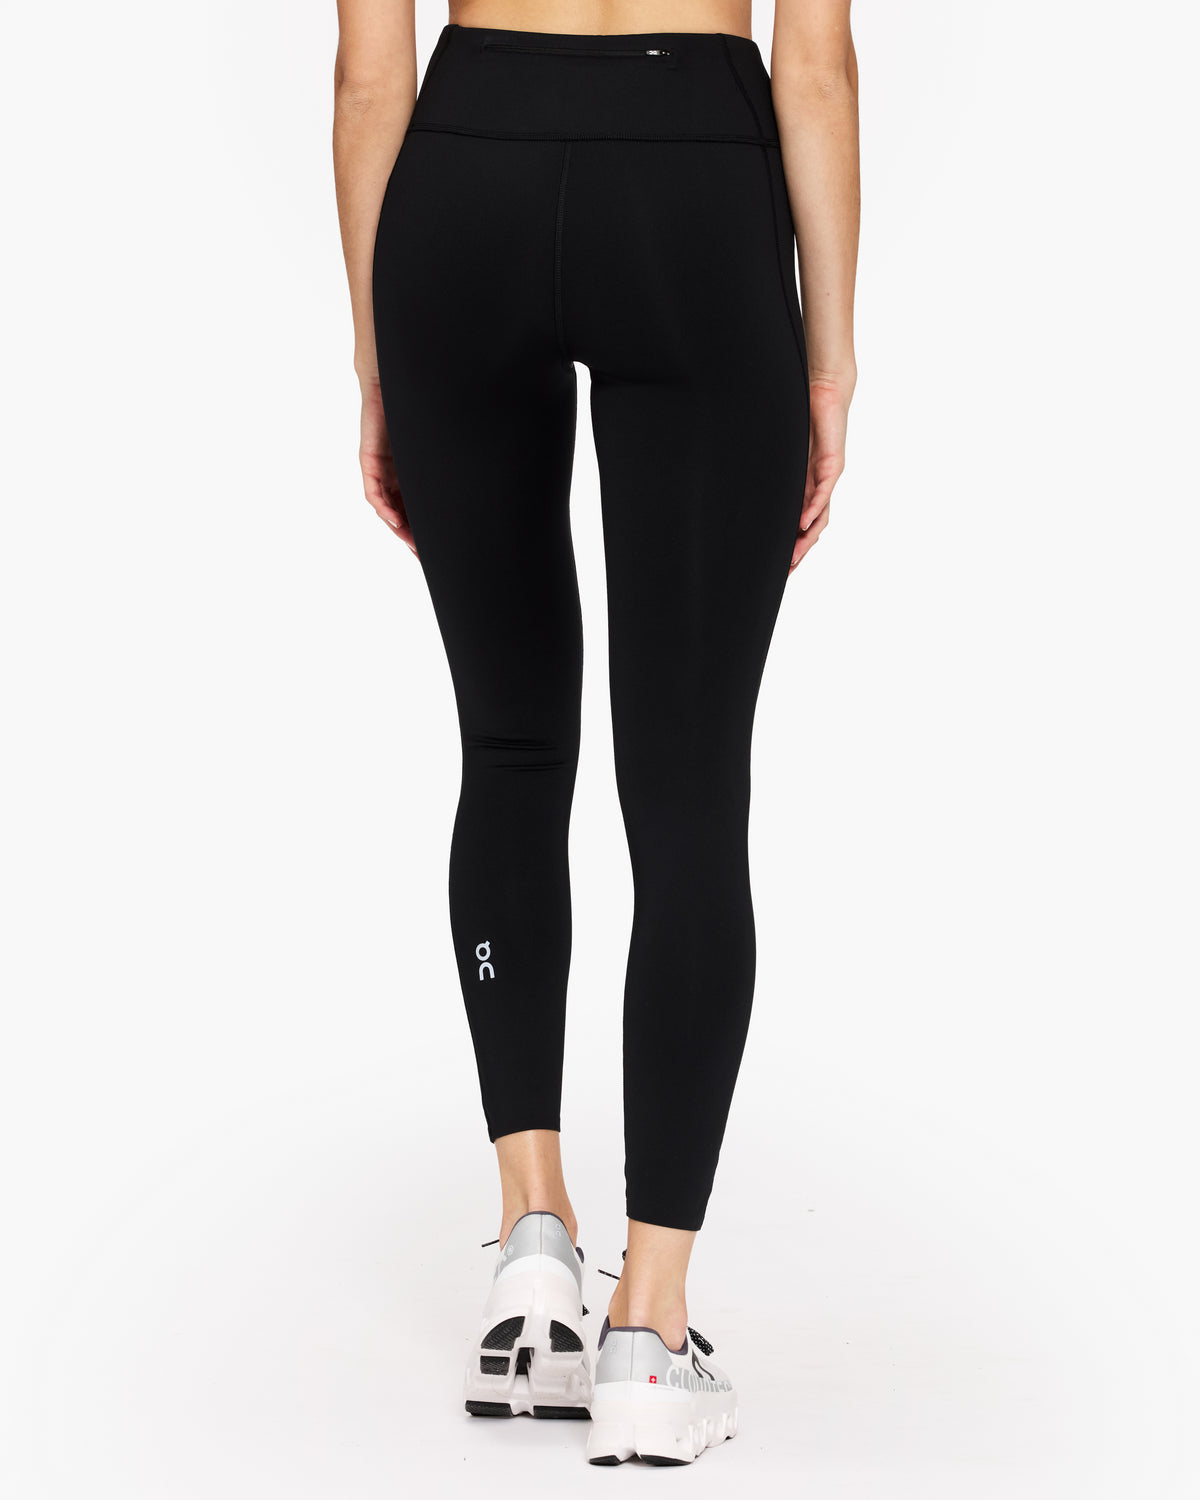 On Core Tights – The Shop at Equinox